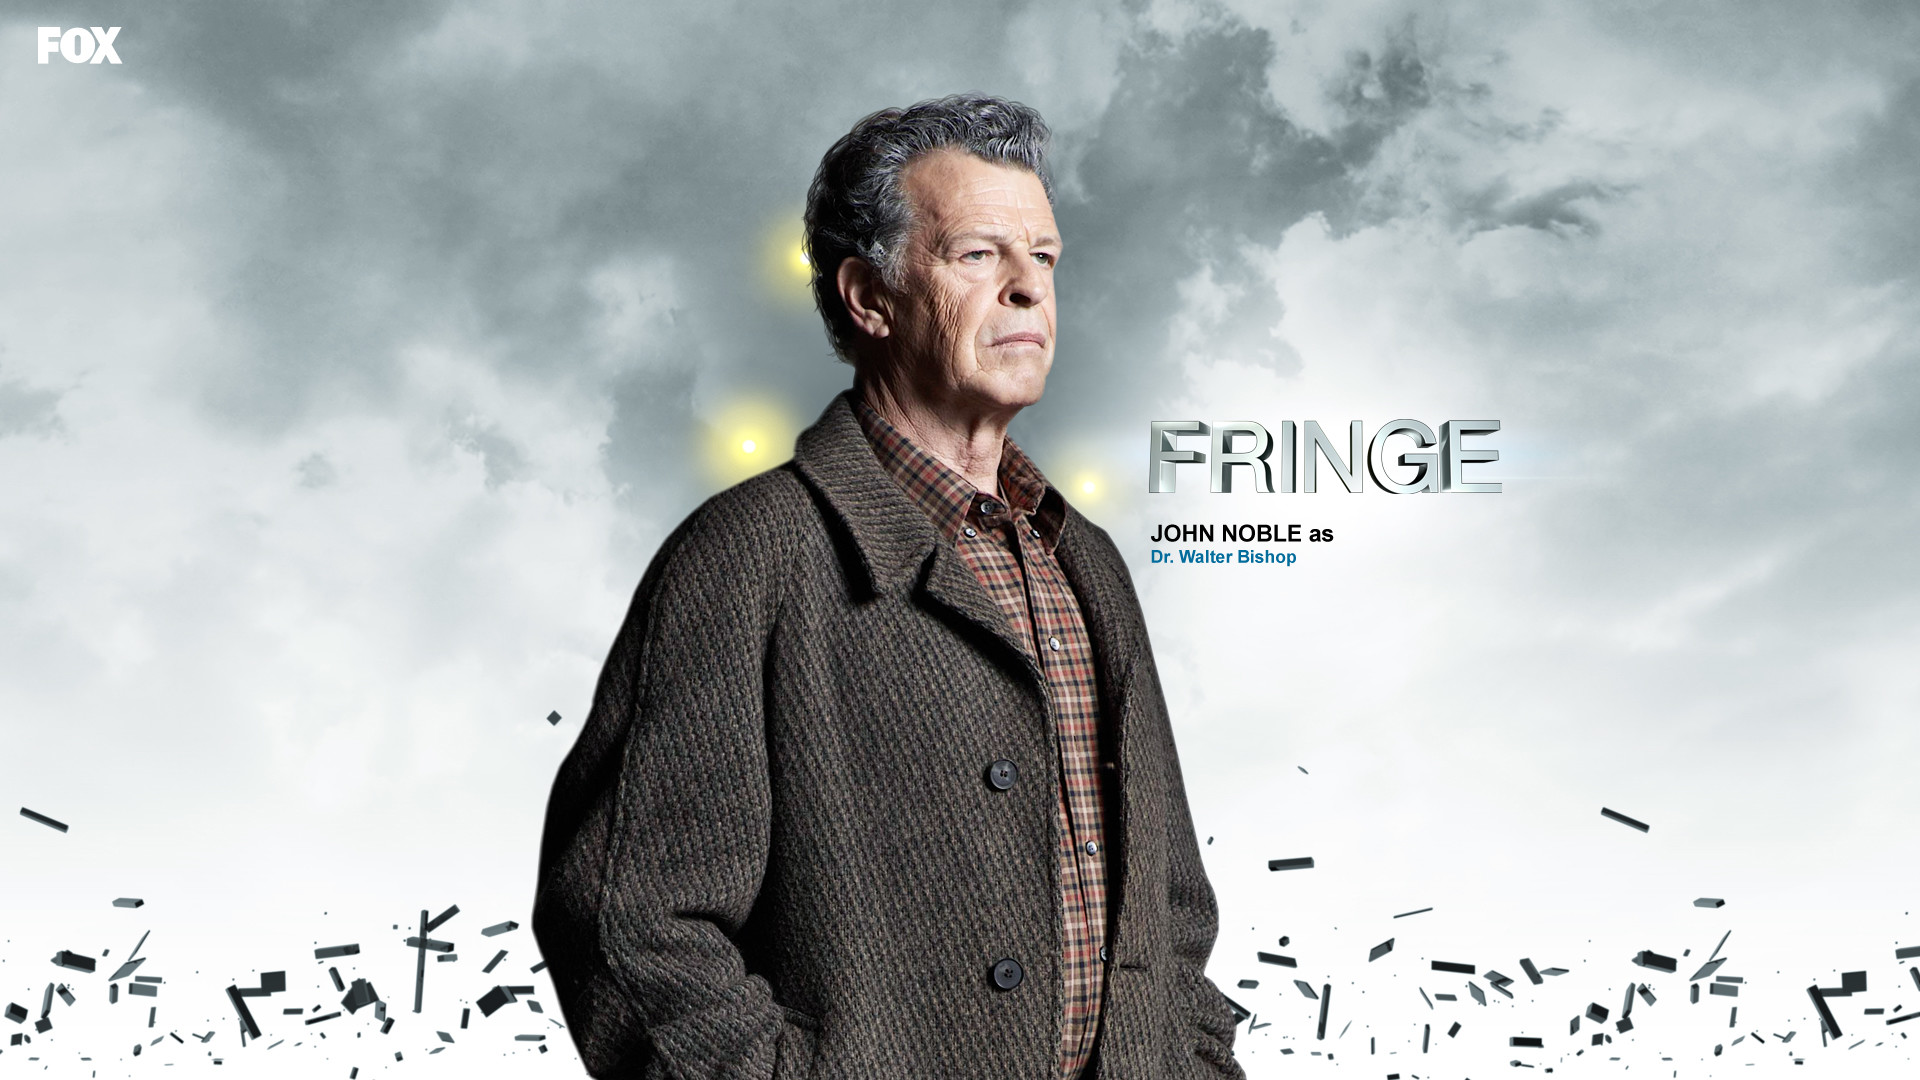 1920x1080 Here are some cool HD wallpapers of the geeky sci-fi TV show Fringe :